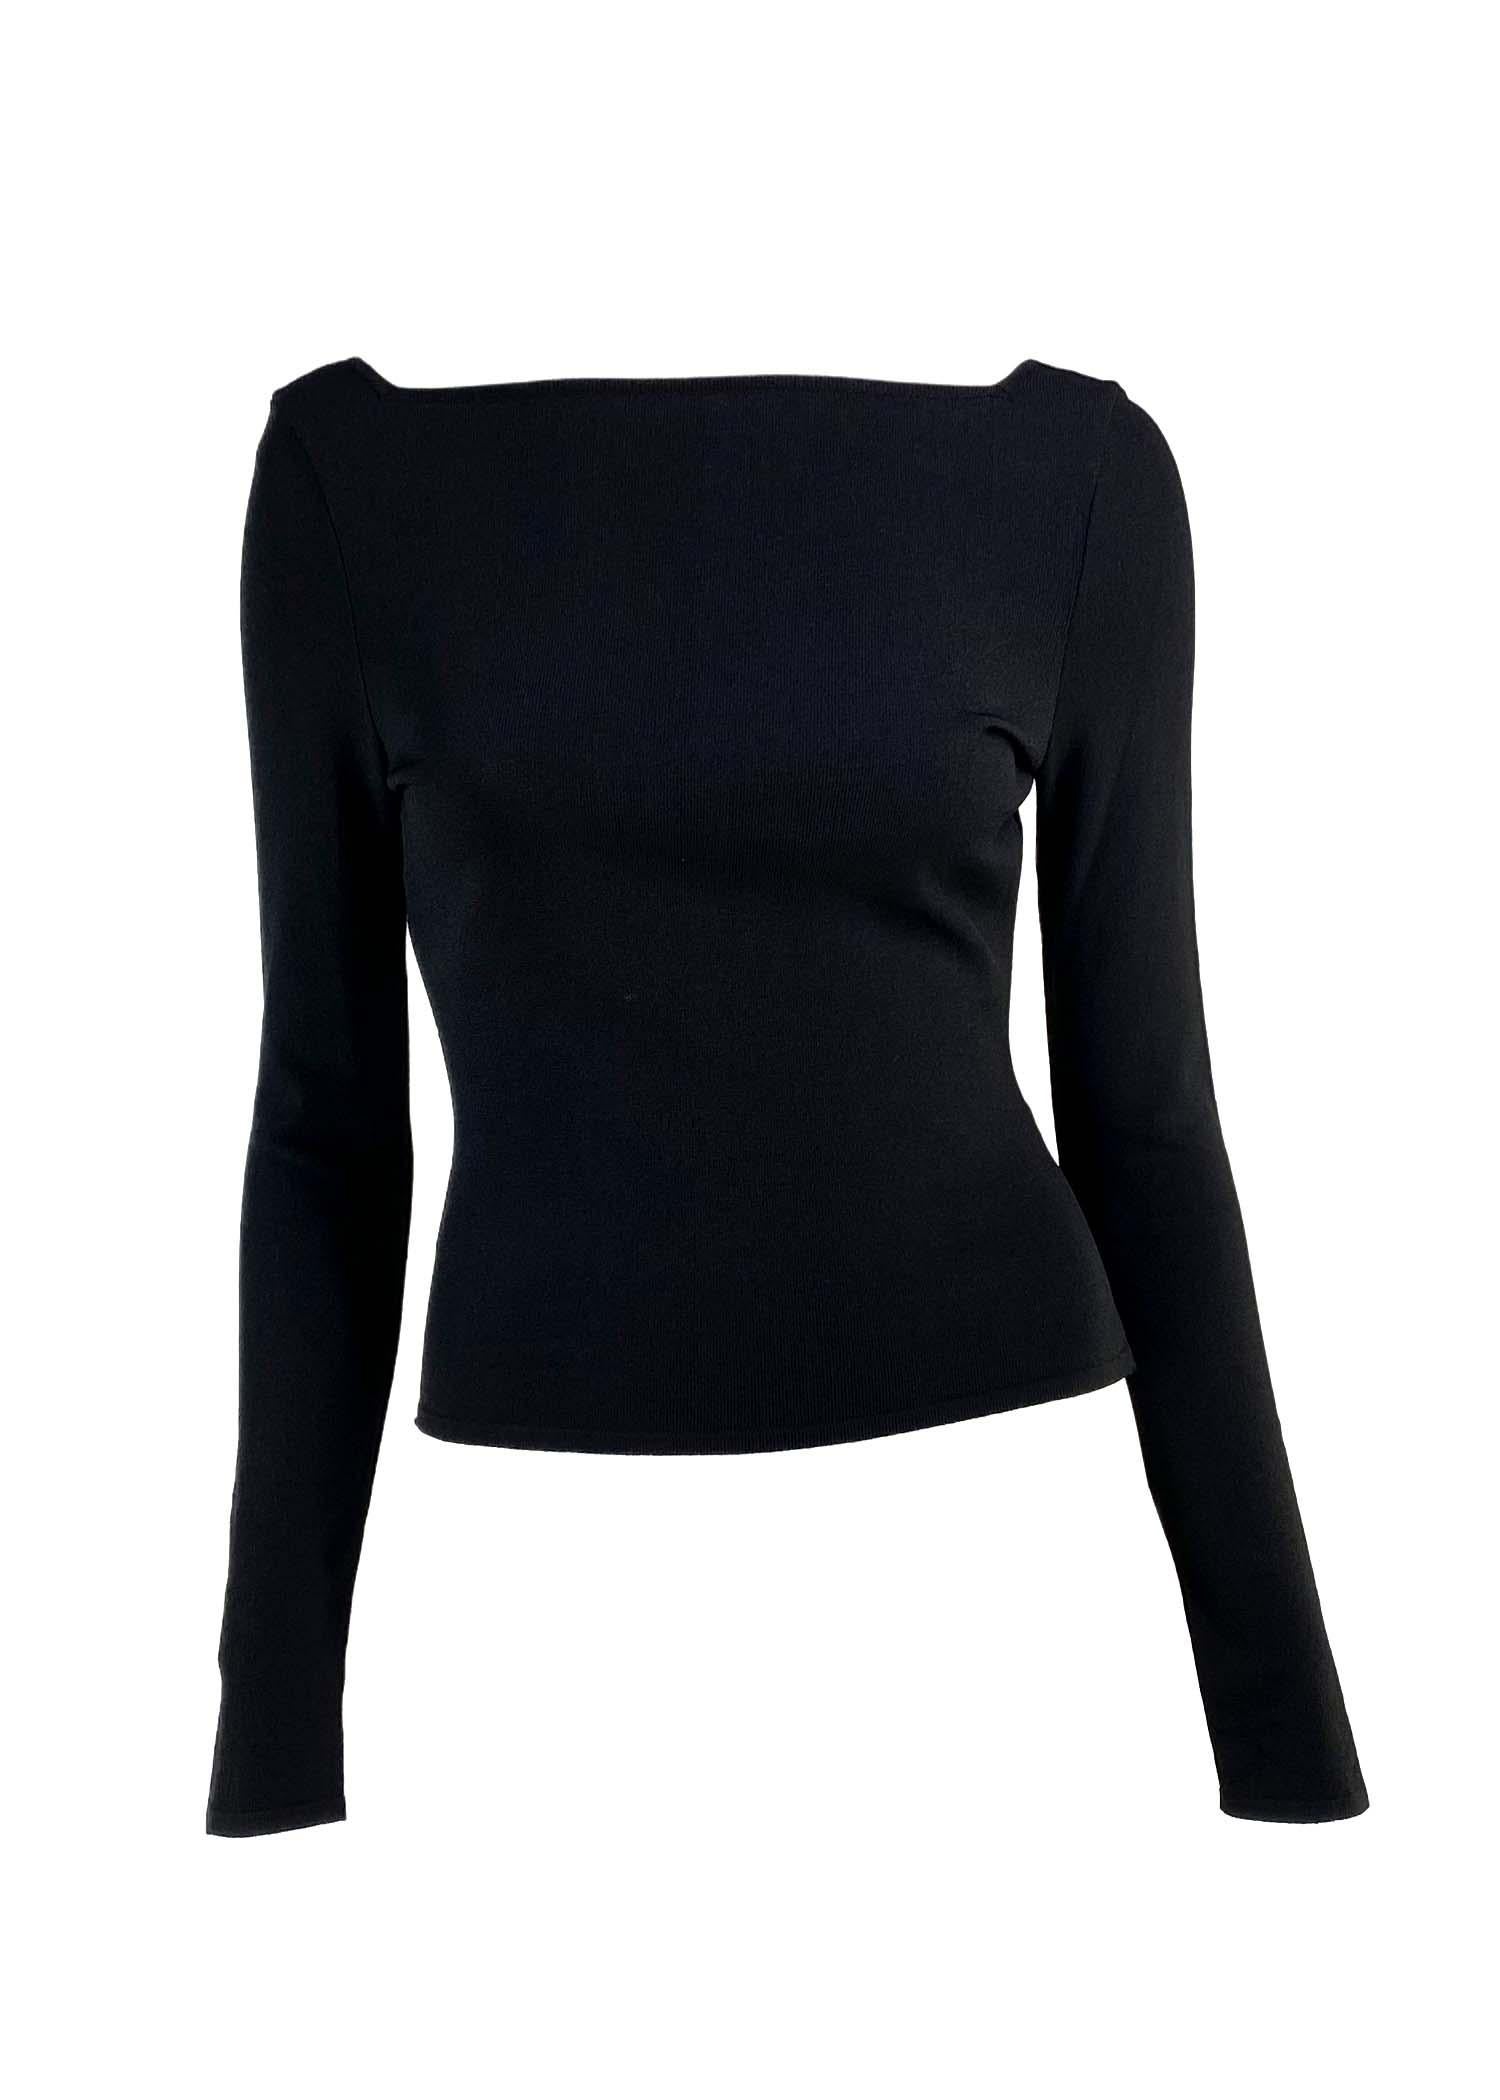 S/S 1998 Gucci by Tom Ford G Buckle Back Long Sleeve Knit Top Black 2